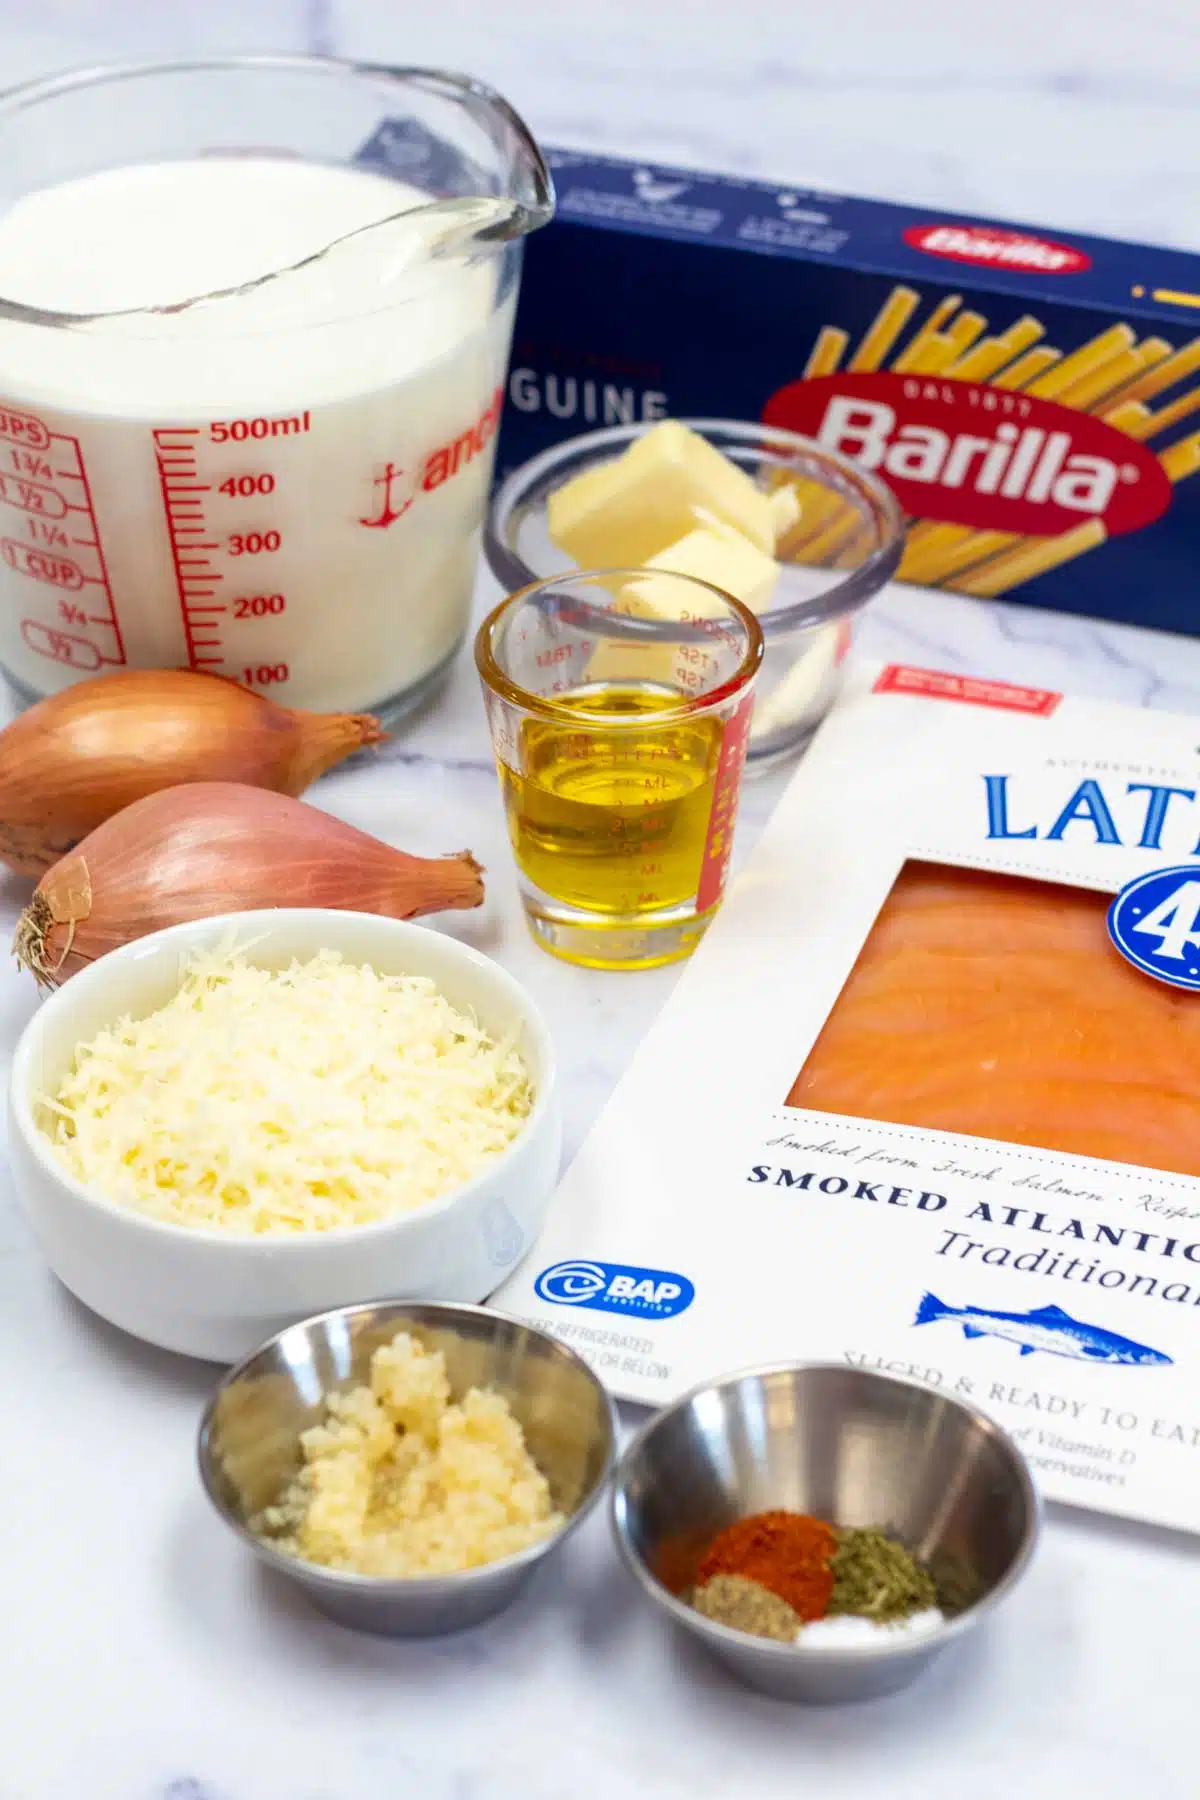 Tall image of creamy salmon pasta ingredients.